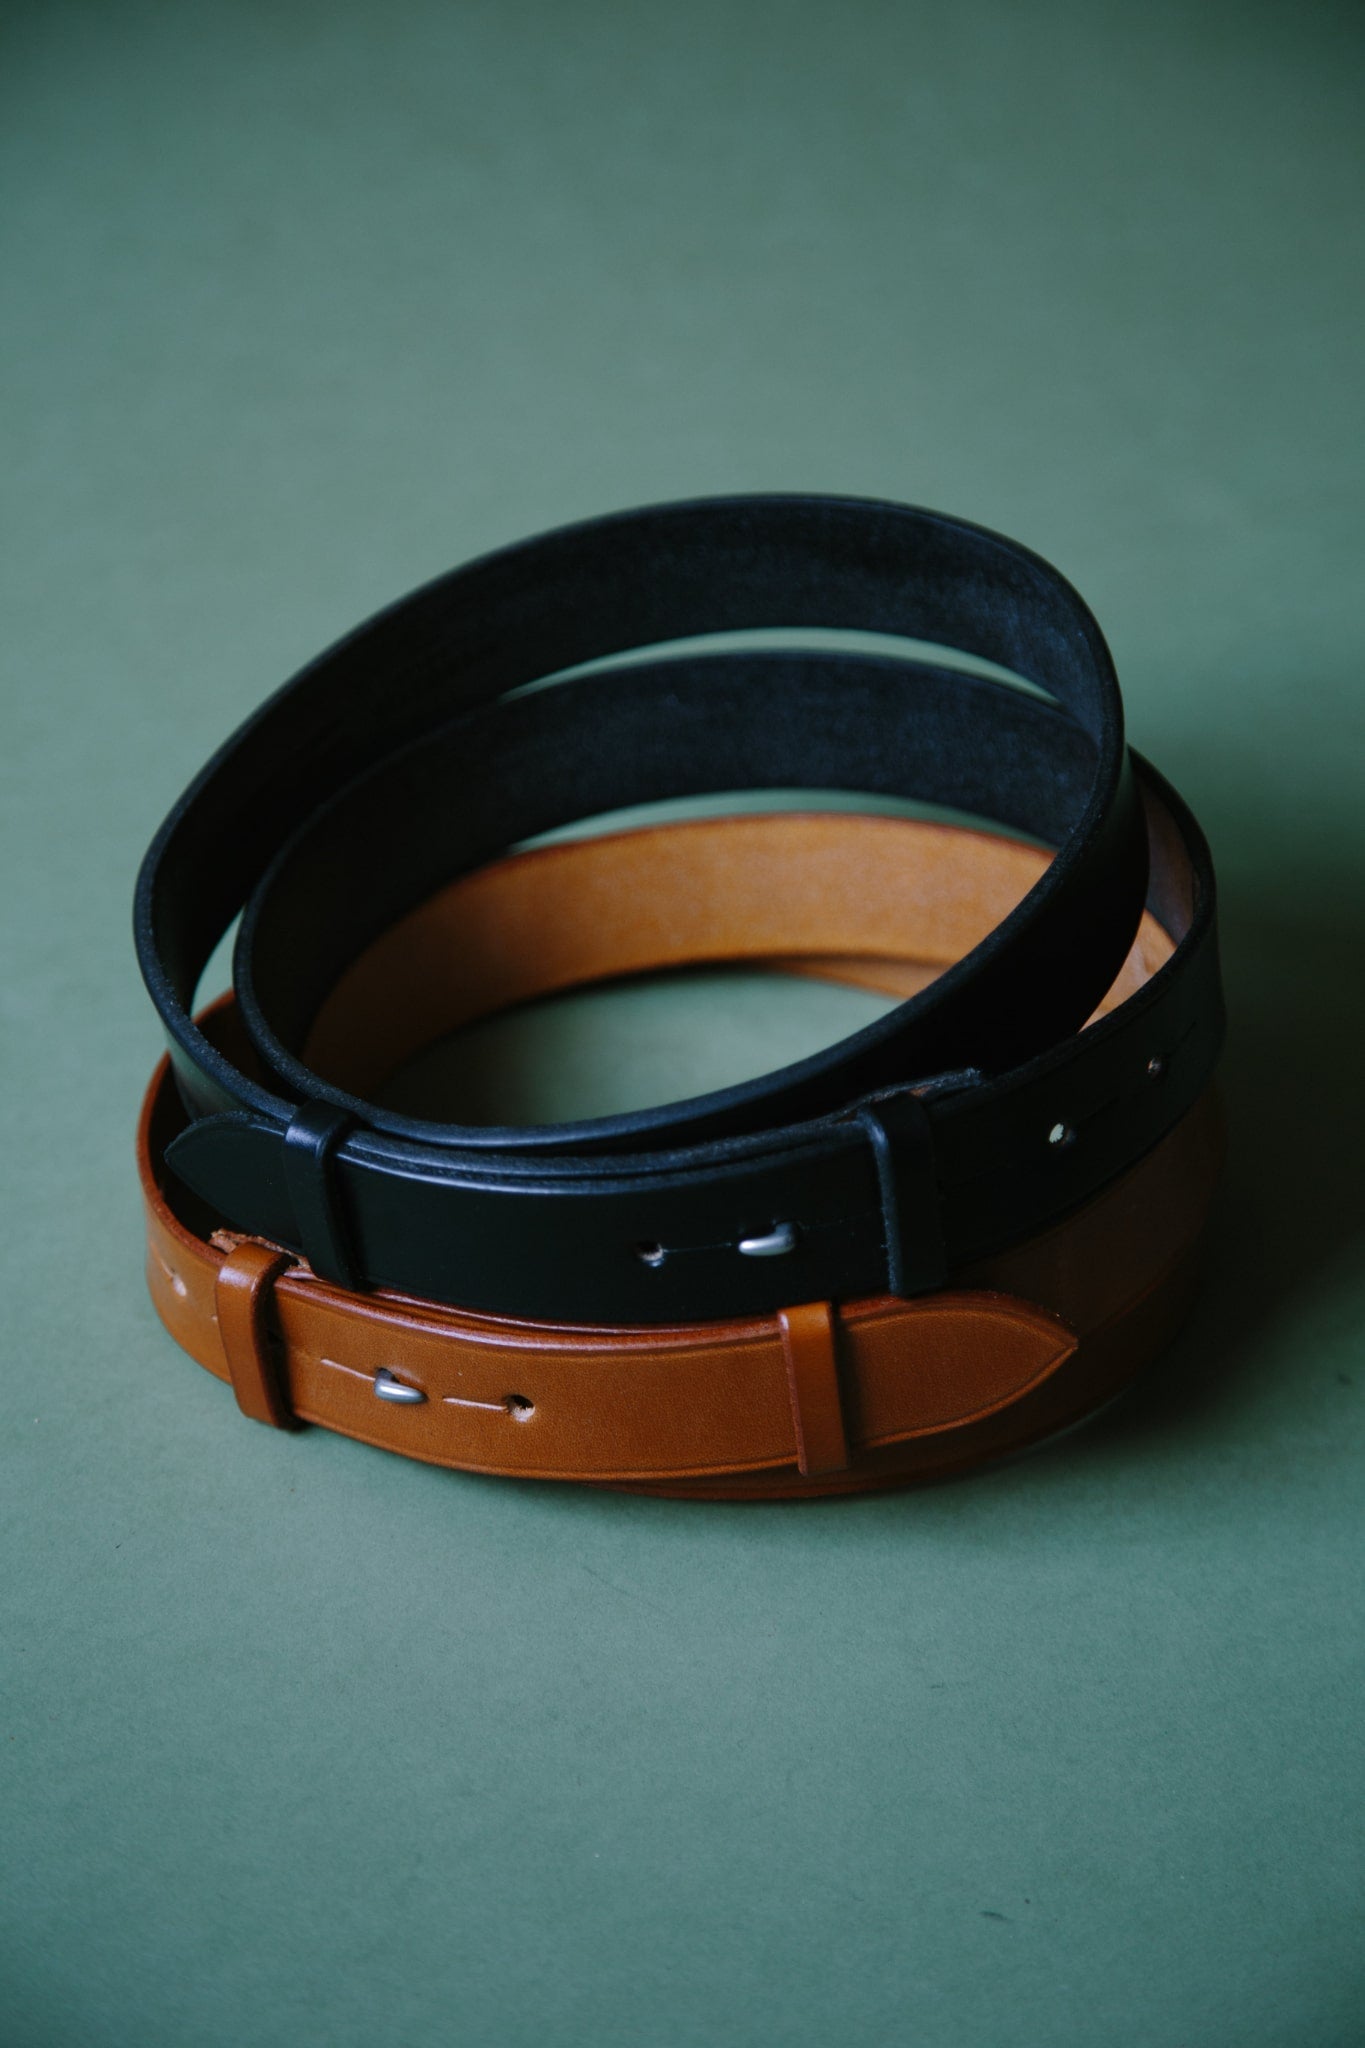 Two McRosite bridle leather belts, wrapped into circles, one tan and one black. Shot on a green background.